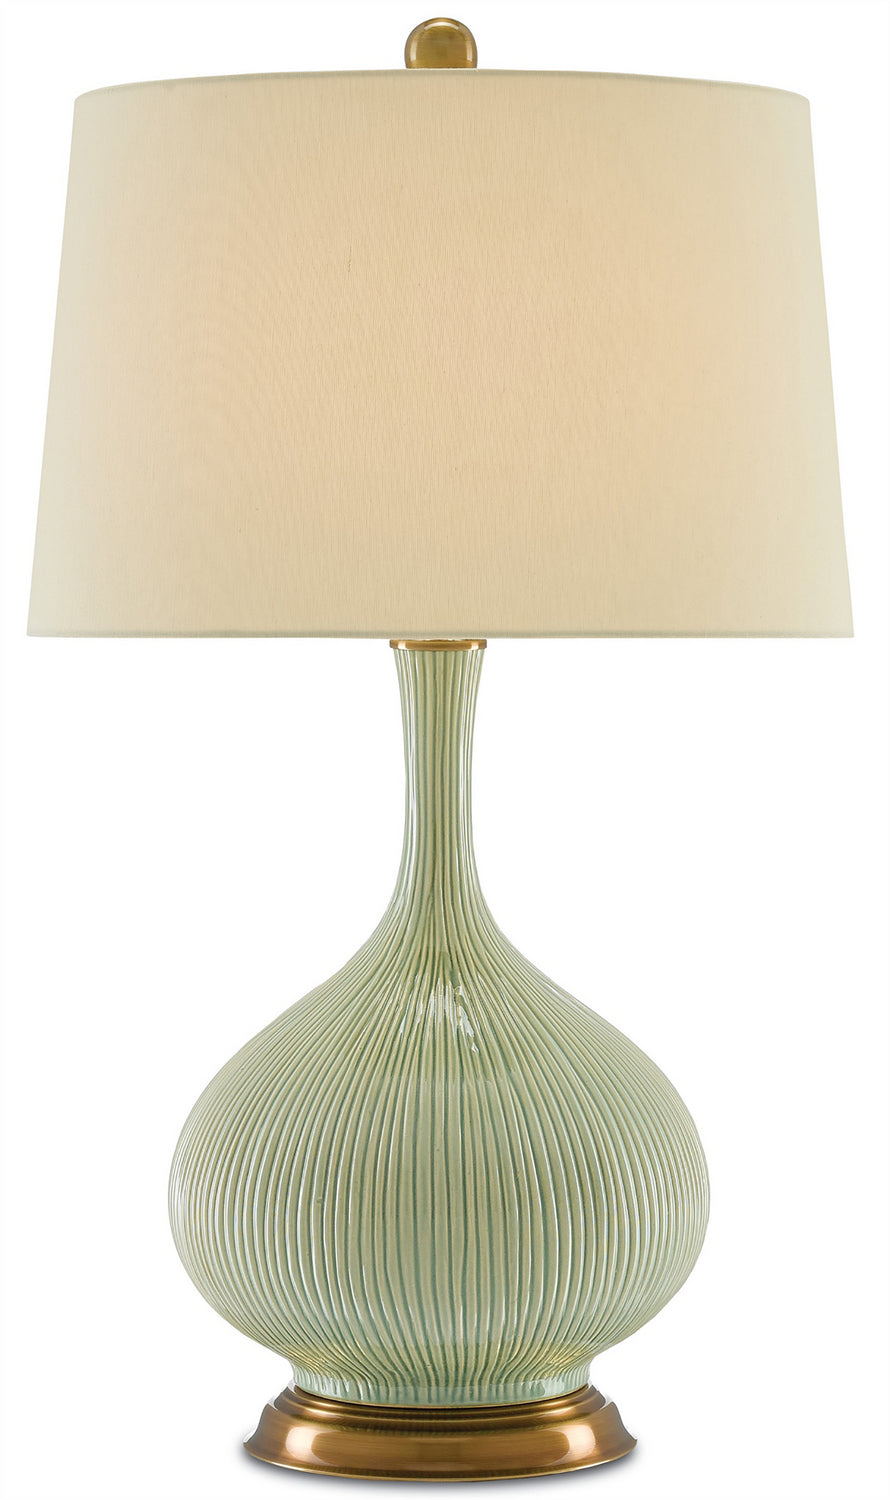 One Light Table Lamp from the Cait collection in Grass Green/Antique Brass finish